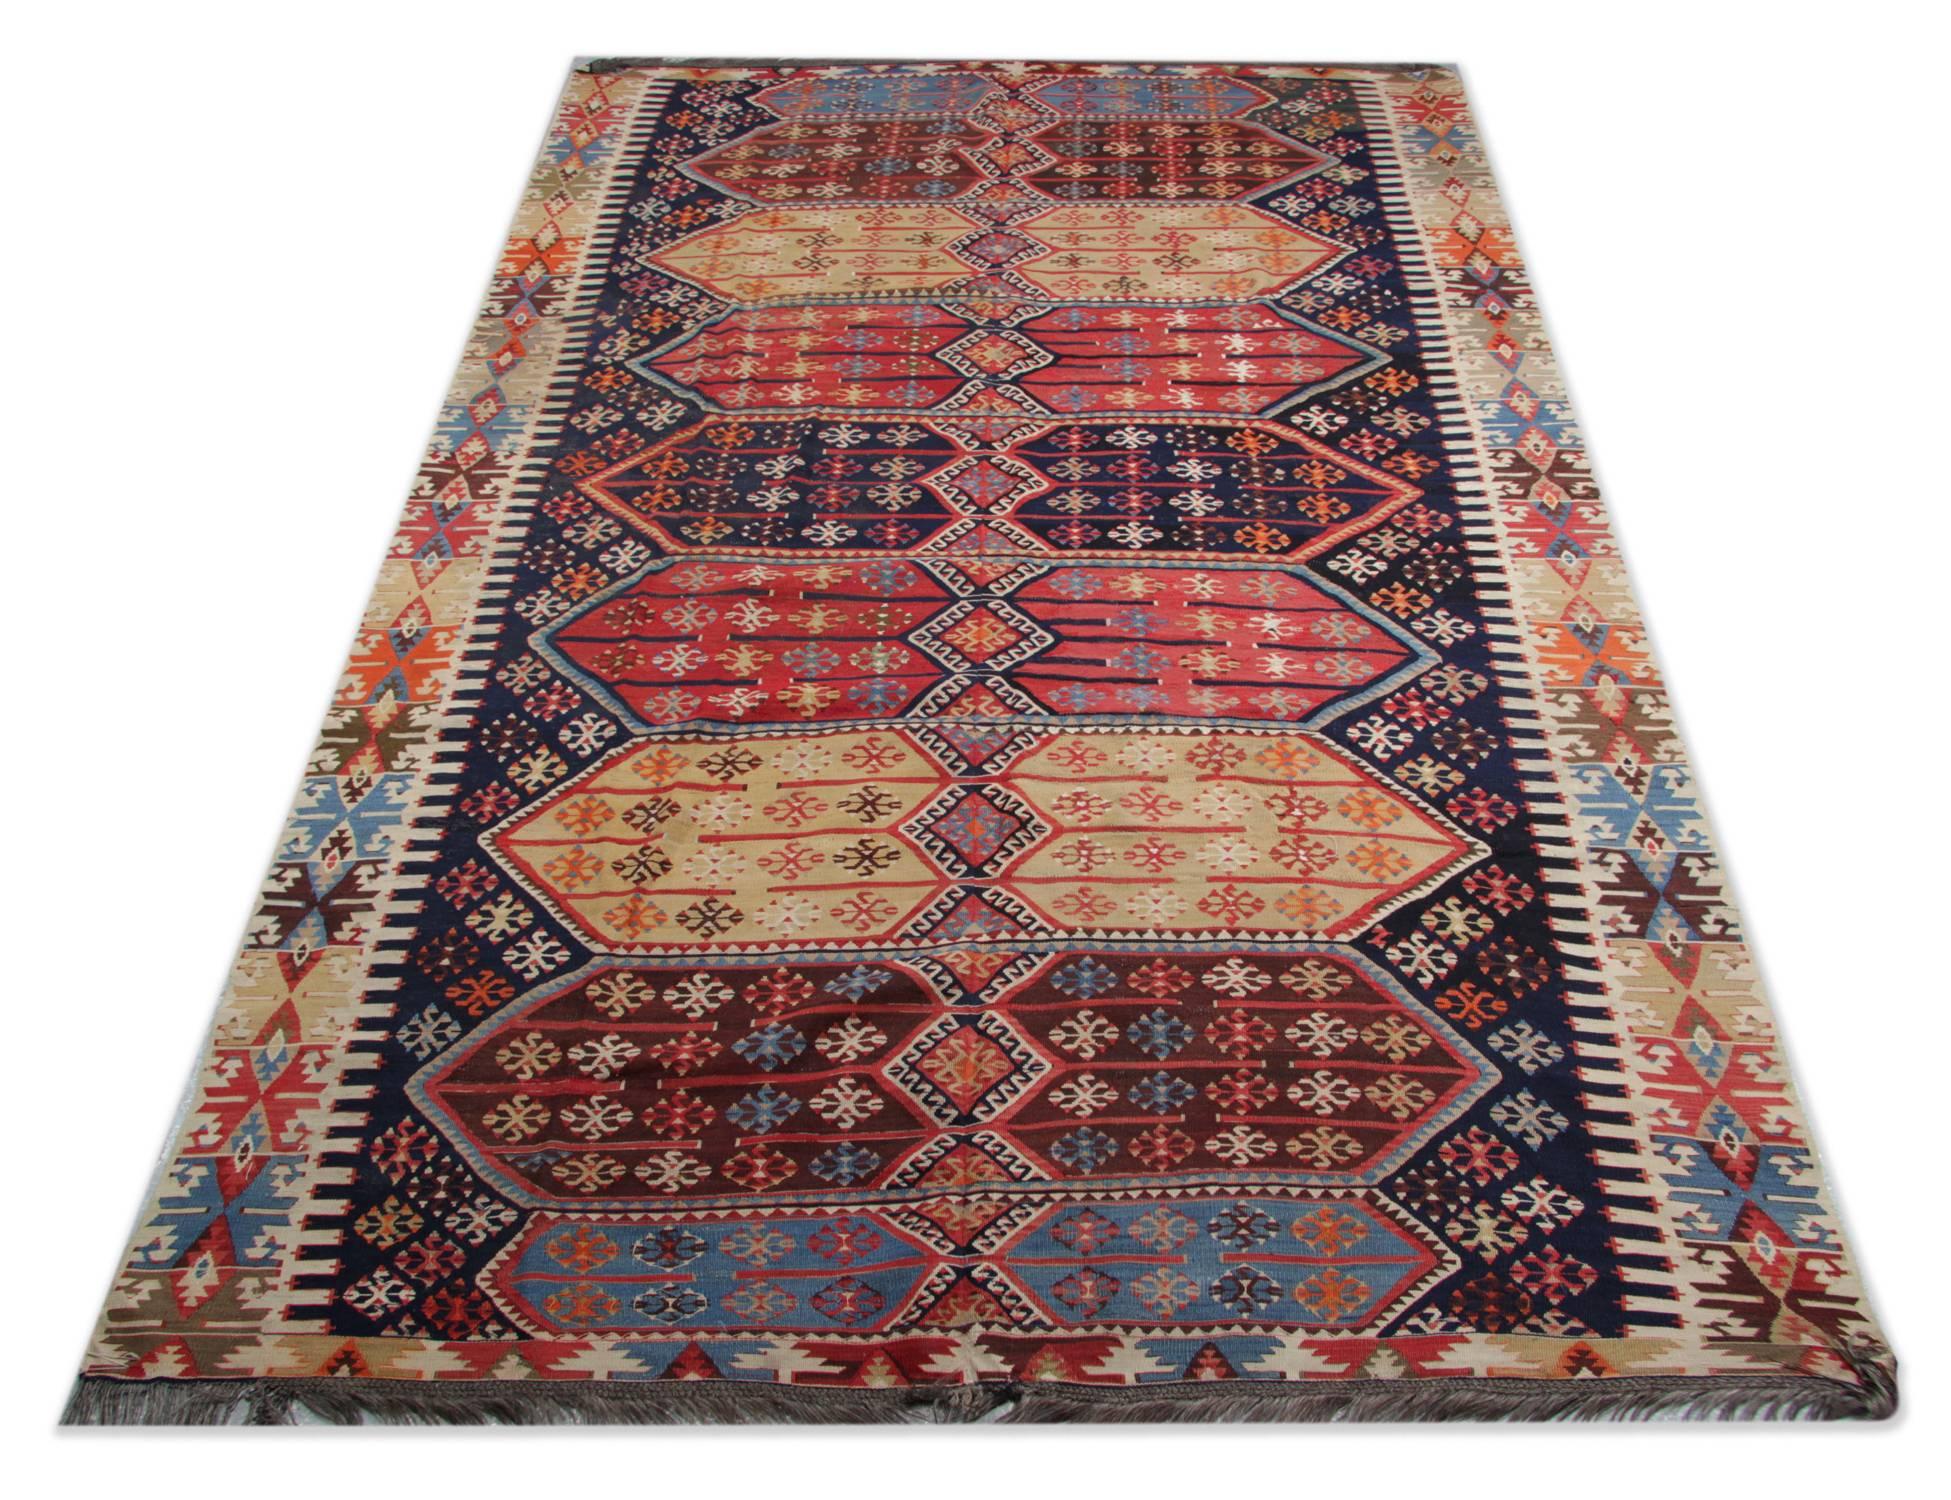 These oriental rugs are from Konya, which is located in the heart of Turkey. The workshop kilim rugs of Konya are mostly known for their distinctive geometric designs. These patterned rugs have all over geometric design with the same patterns on the